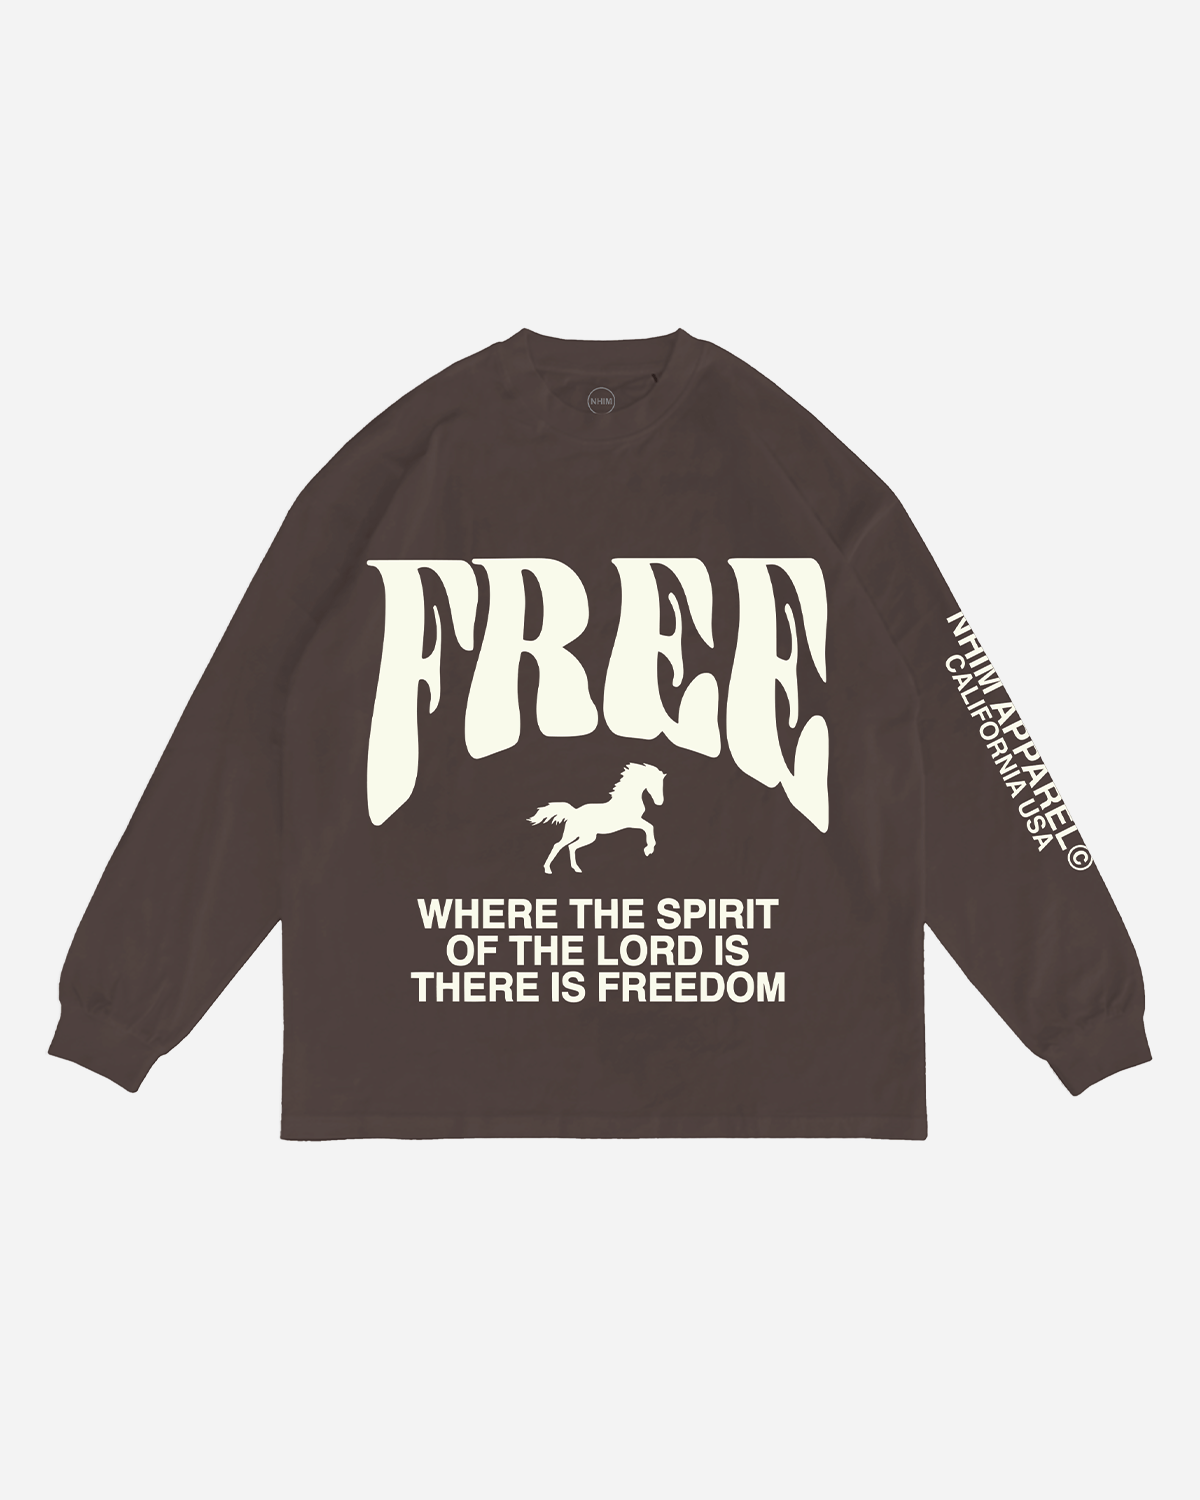 Christian long-sleeve shirt - where the Spirit of the Lord is there is freedom - FREE horse